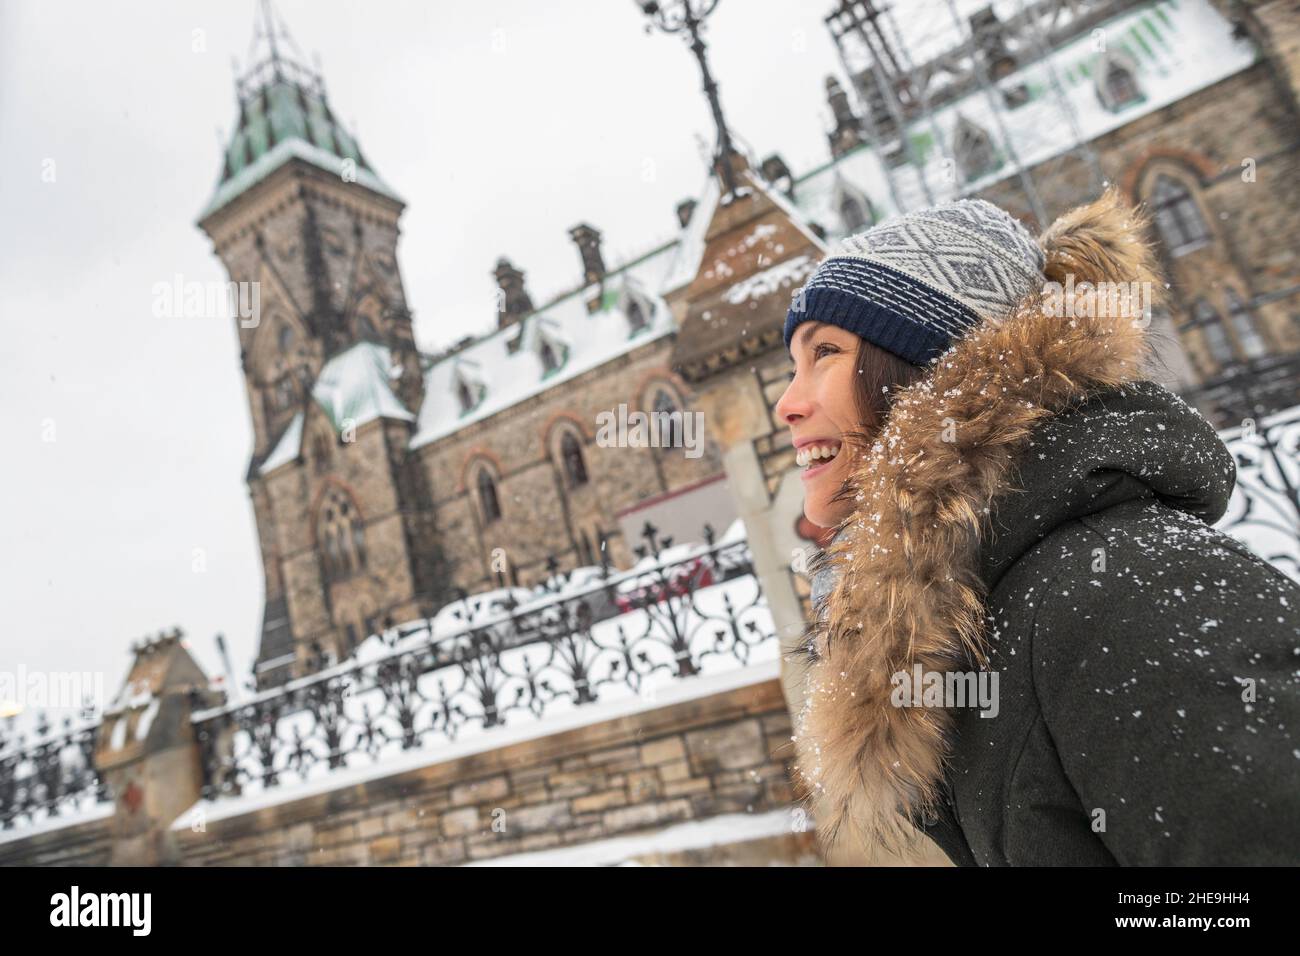 Ottawa winter city Asian woman walking by Canadian Parliament in Ontario, Canada. Travel tourist visiting popular attraction during snowfall wearing Stock Photo